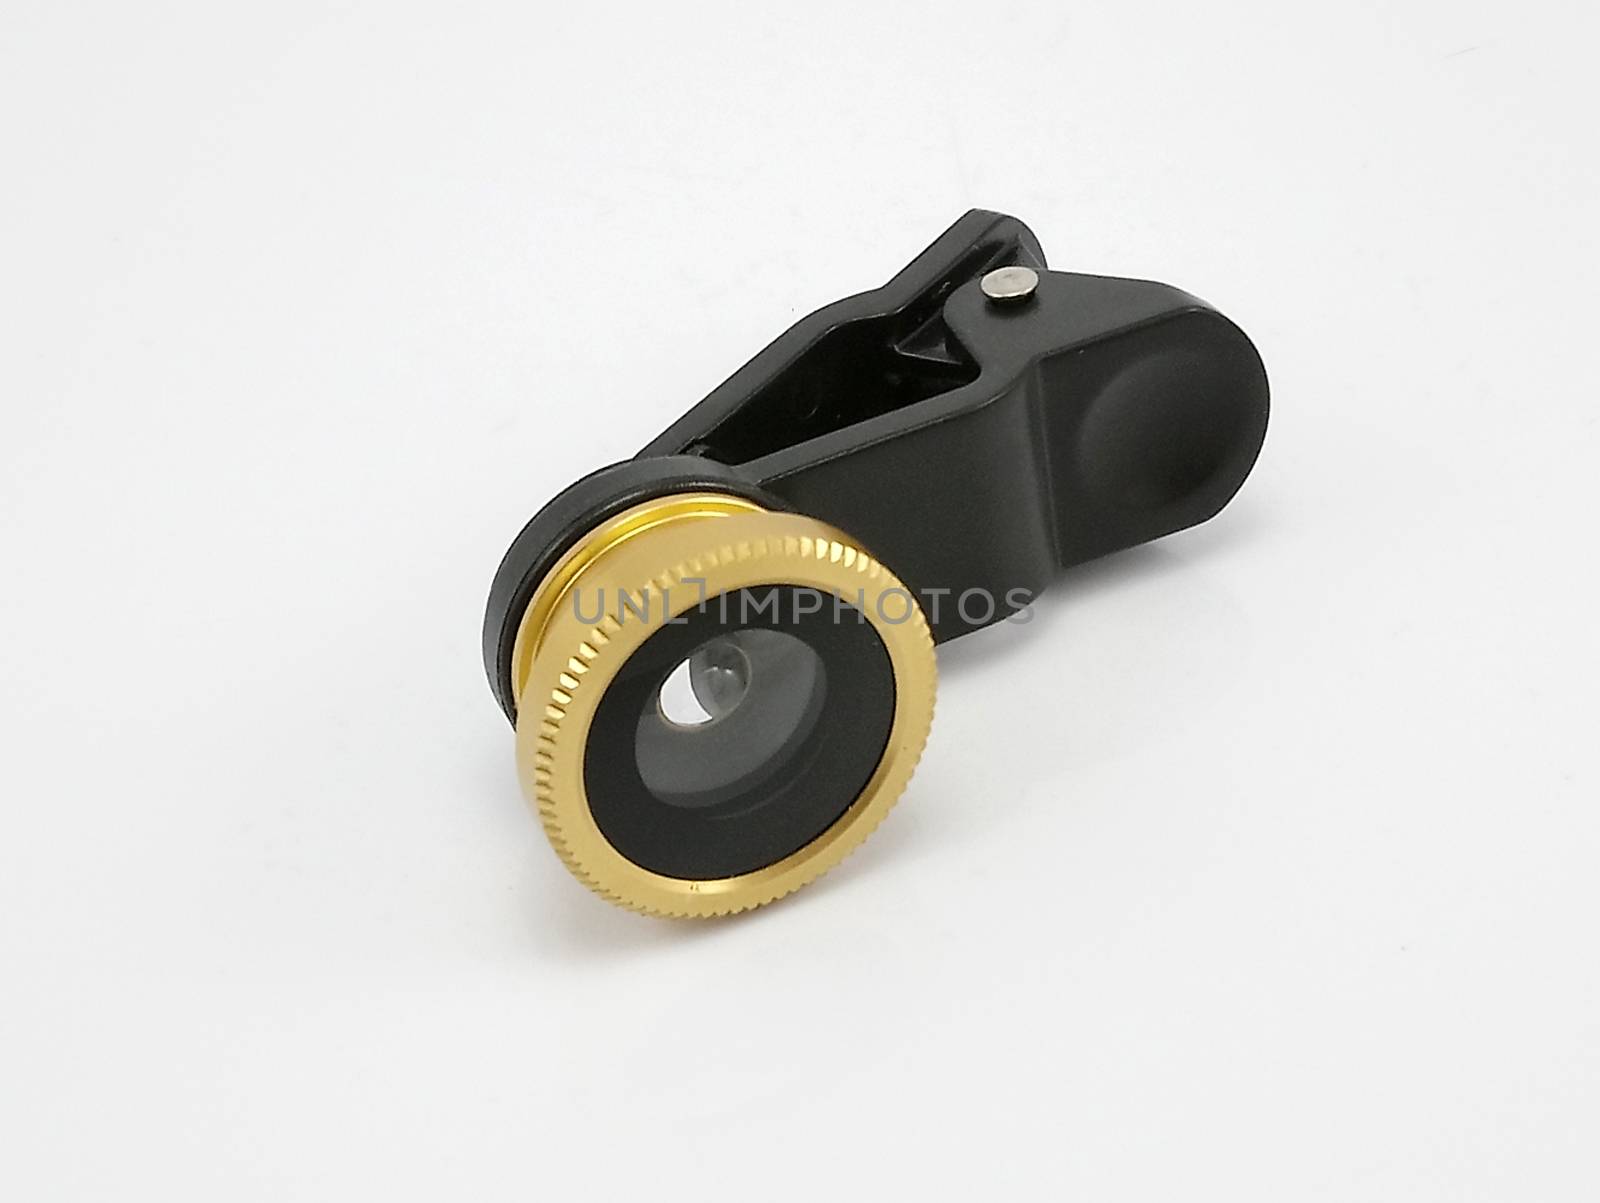 Smartphone camera lens attachment use to put it on small glass camera